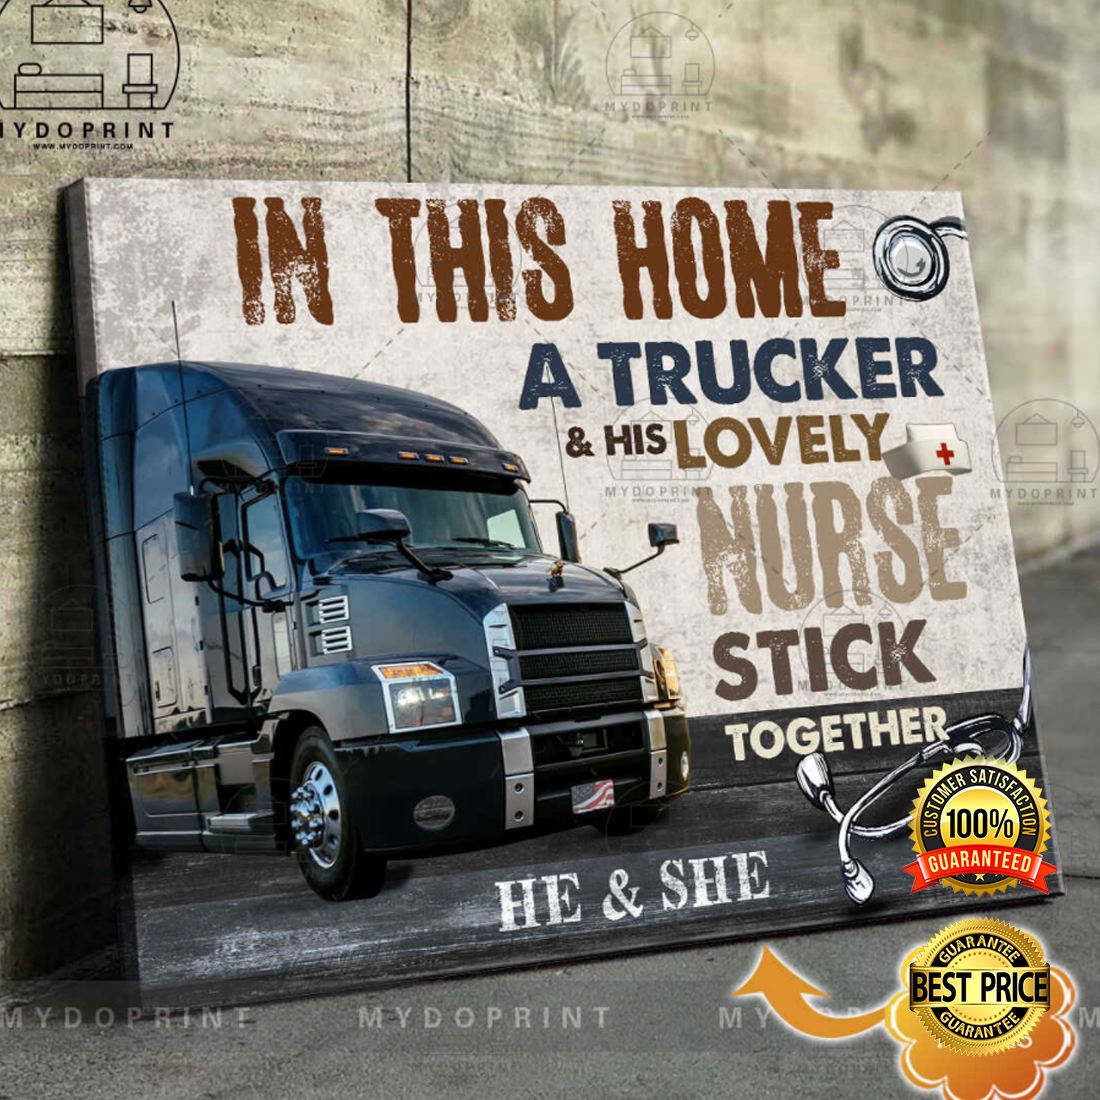 Personalized in this home a trucker and his lovely nurse stick together canvas 4